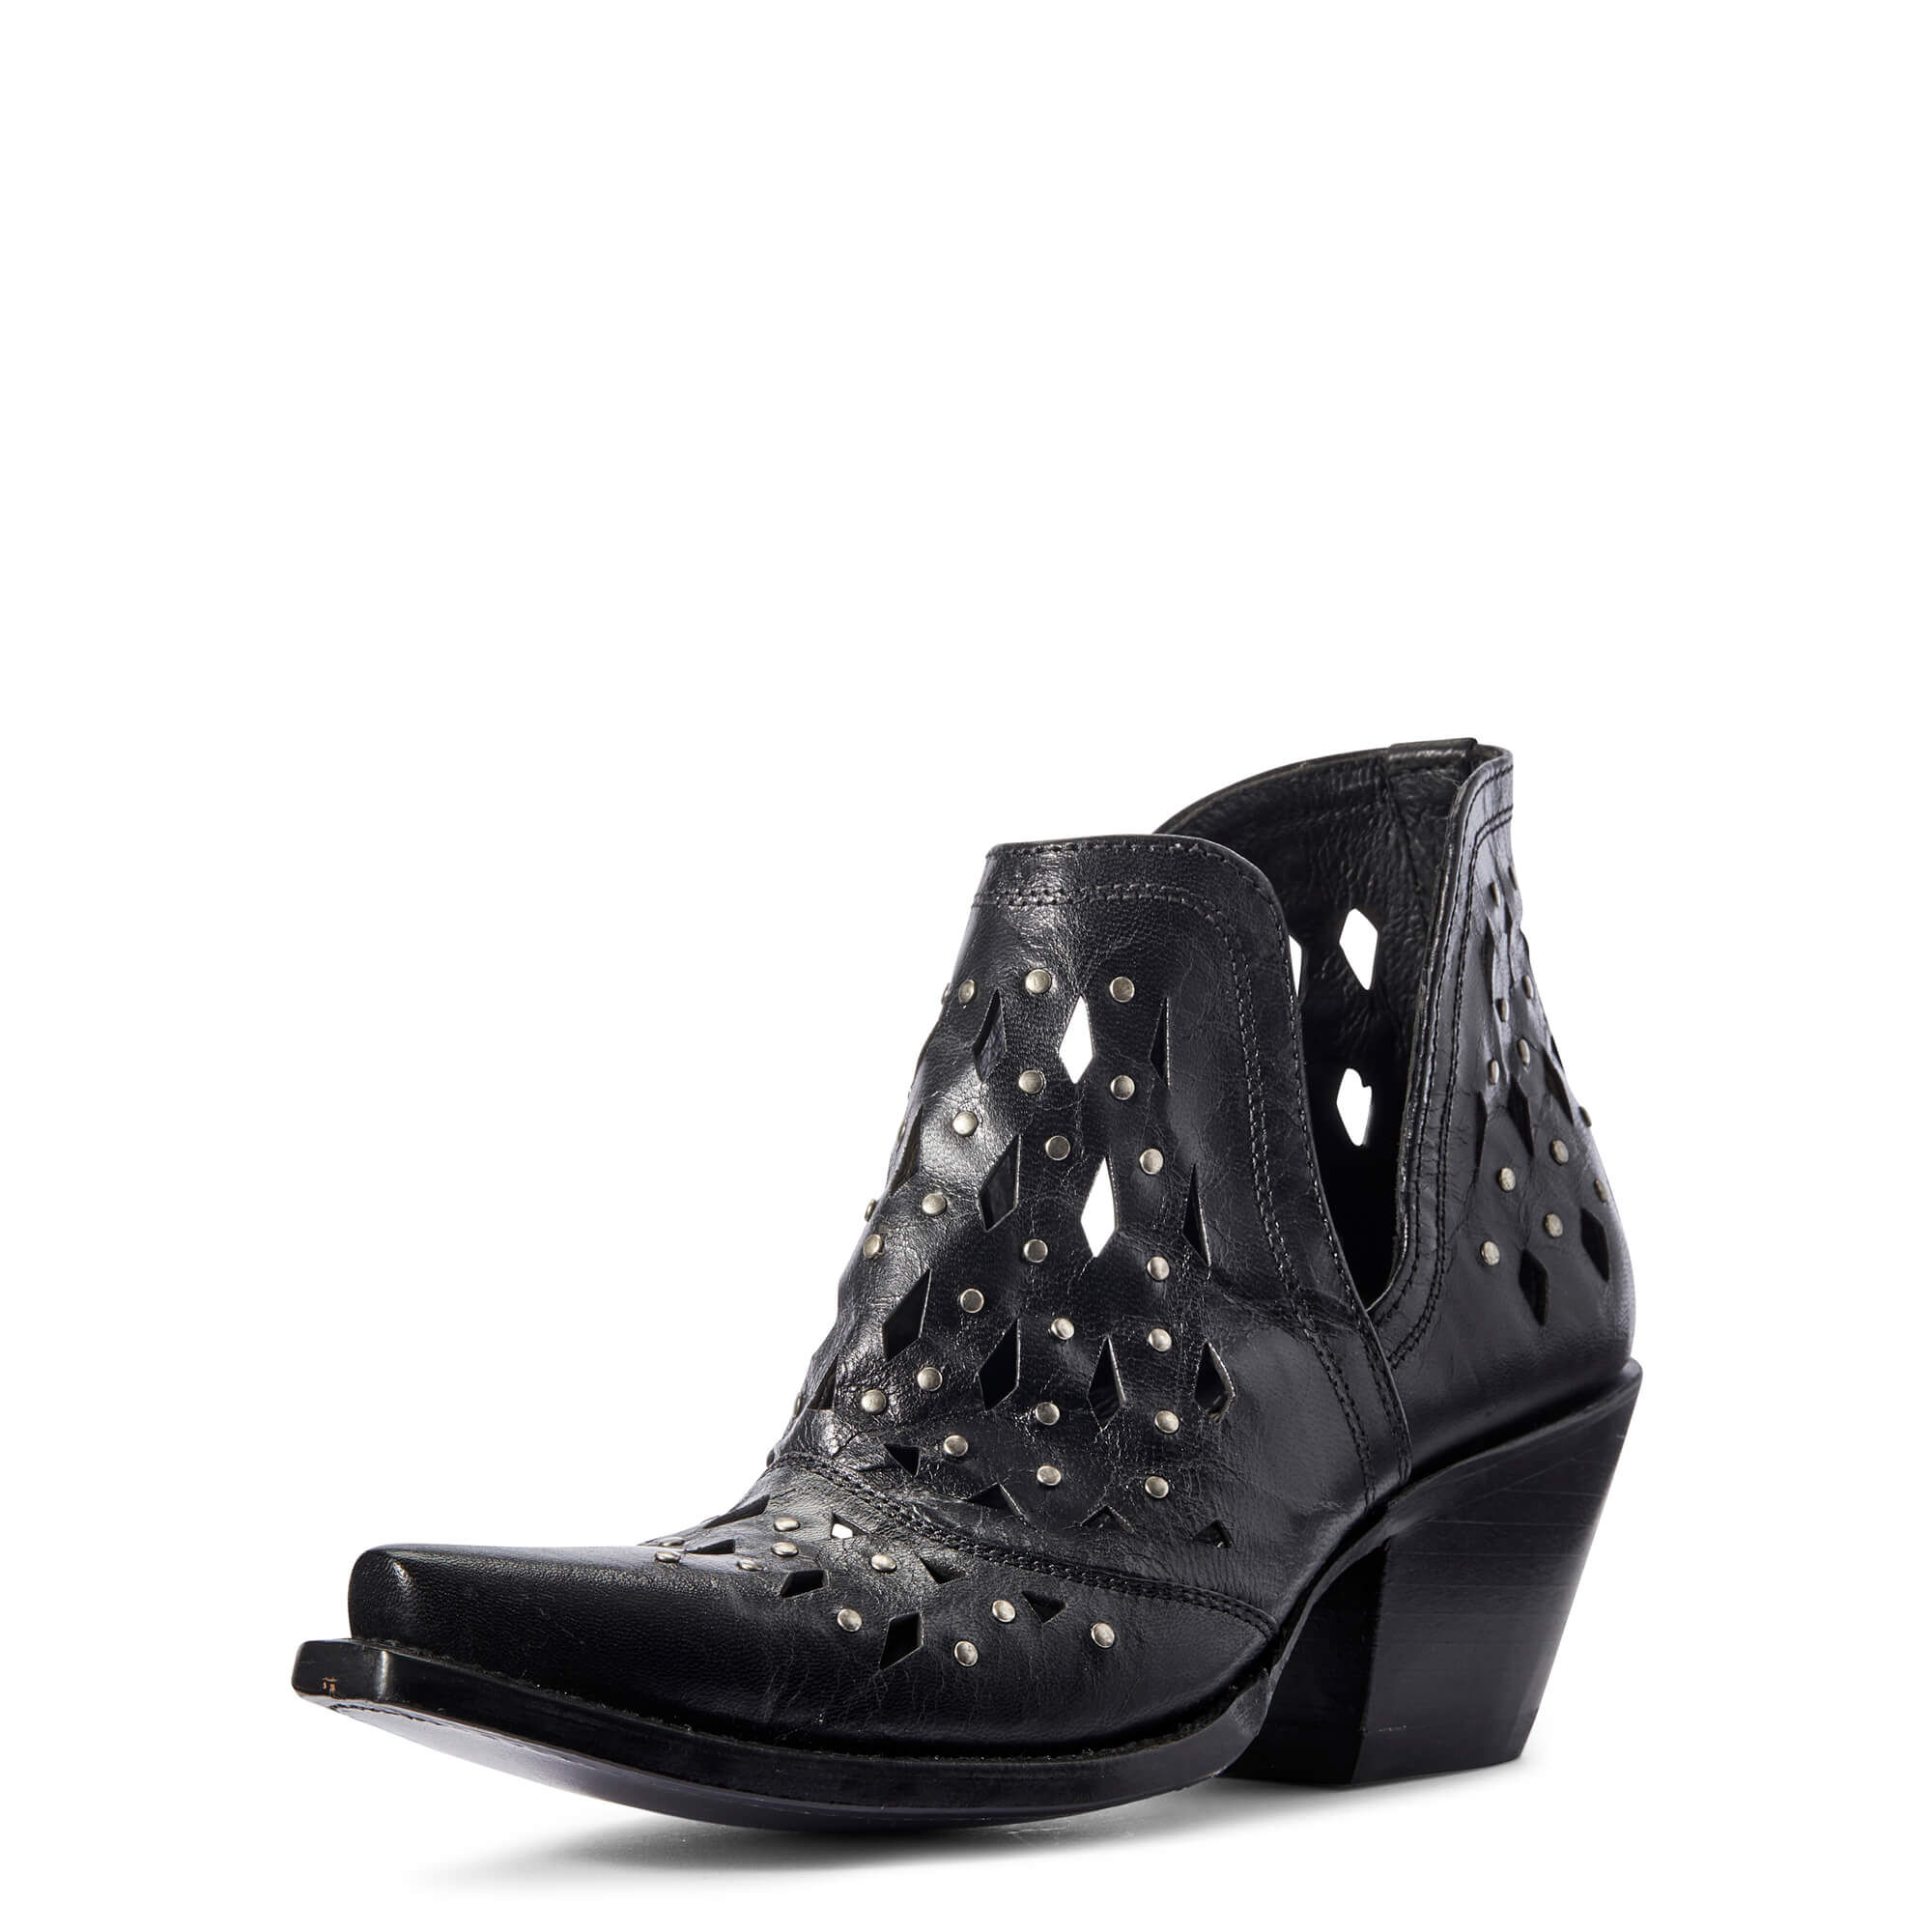 Women's Dixon Studded Western Boots in Black Leather  by Ariat